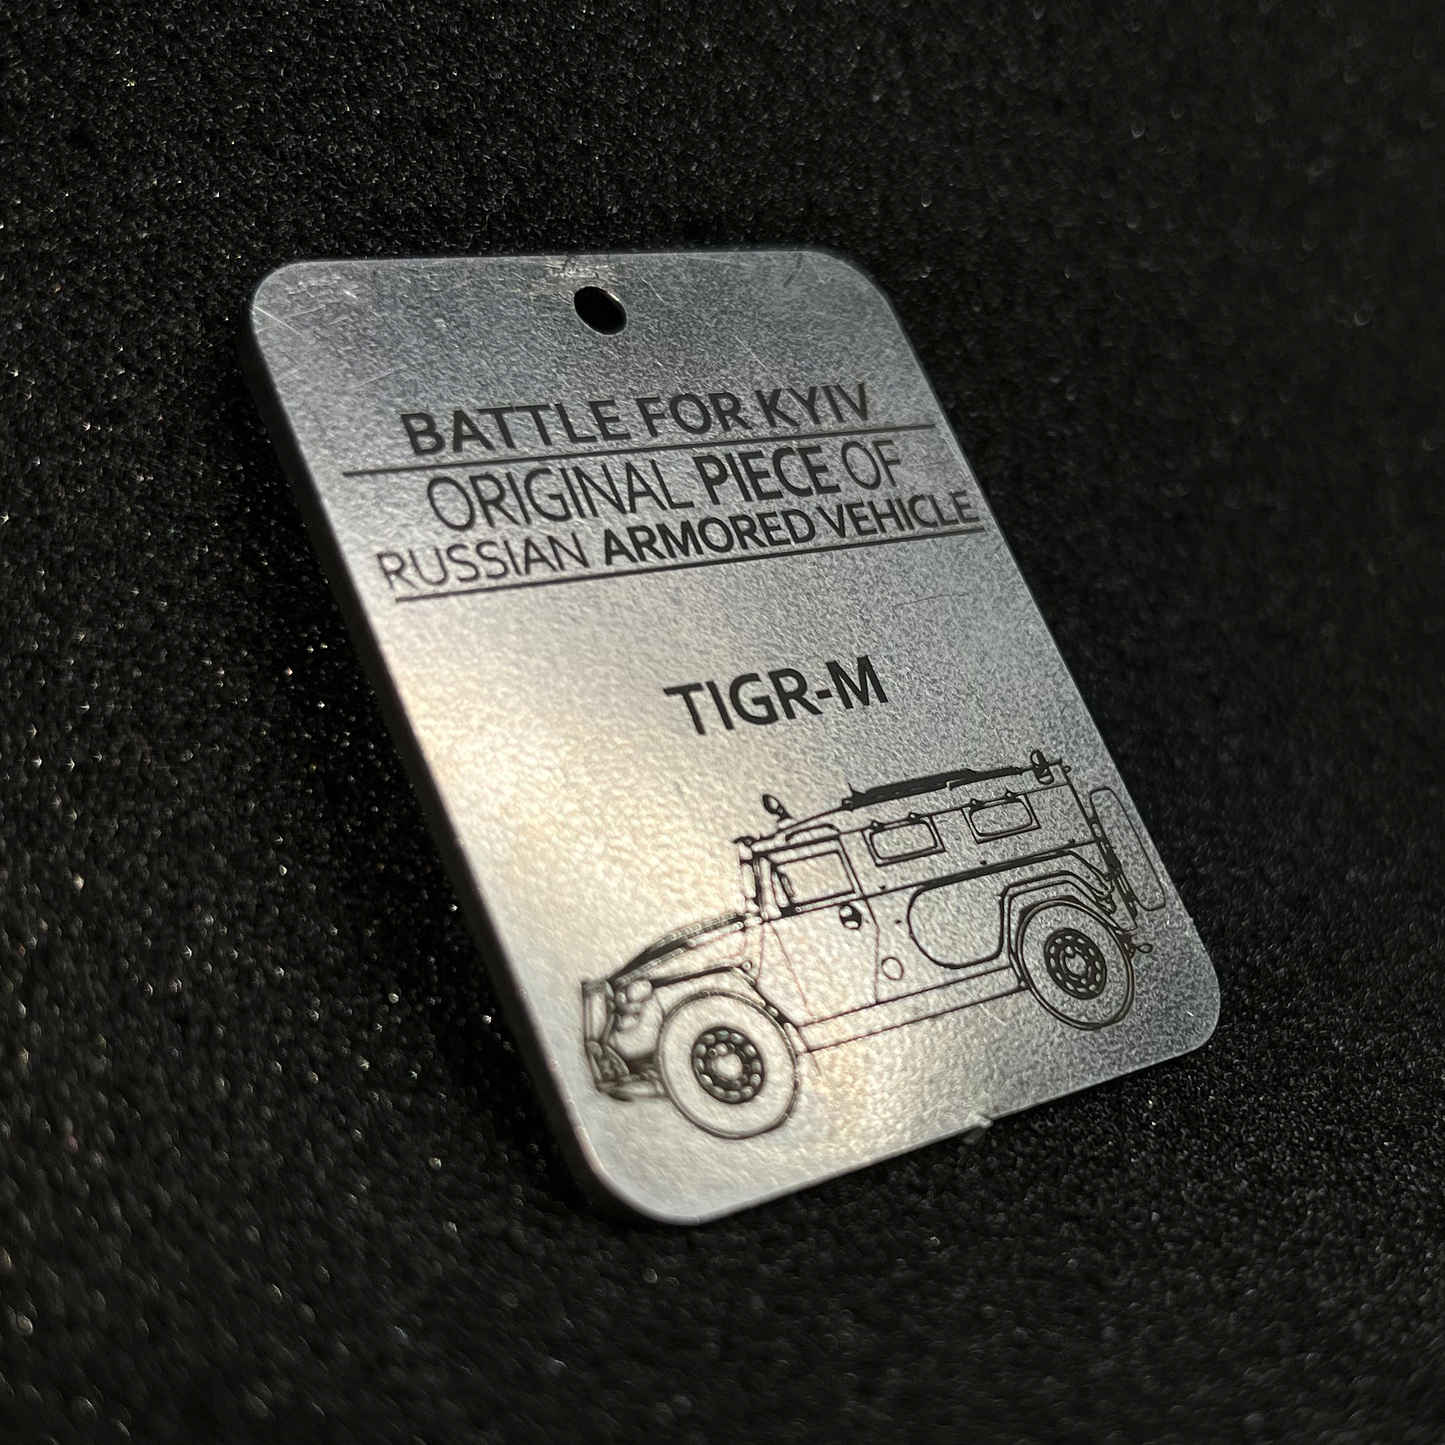 Keychain from Russian Armored Vehicle